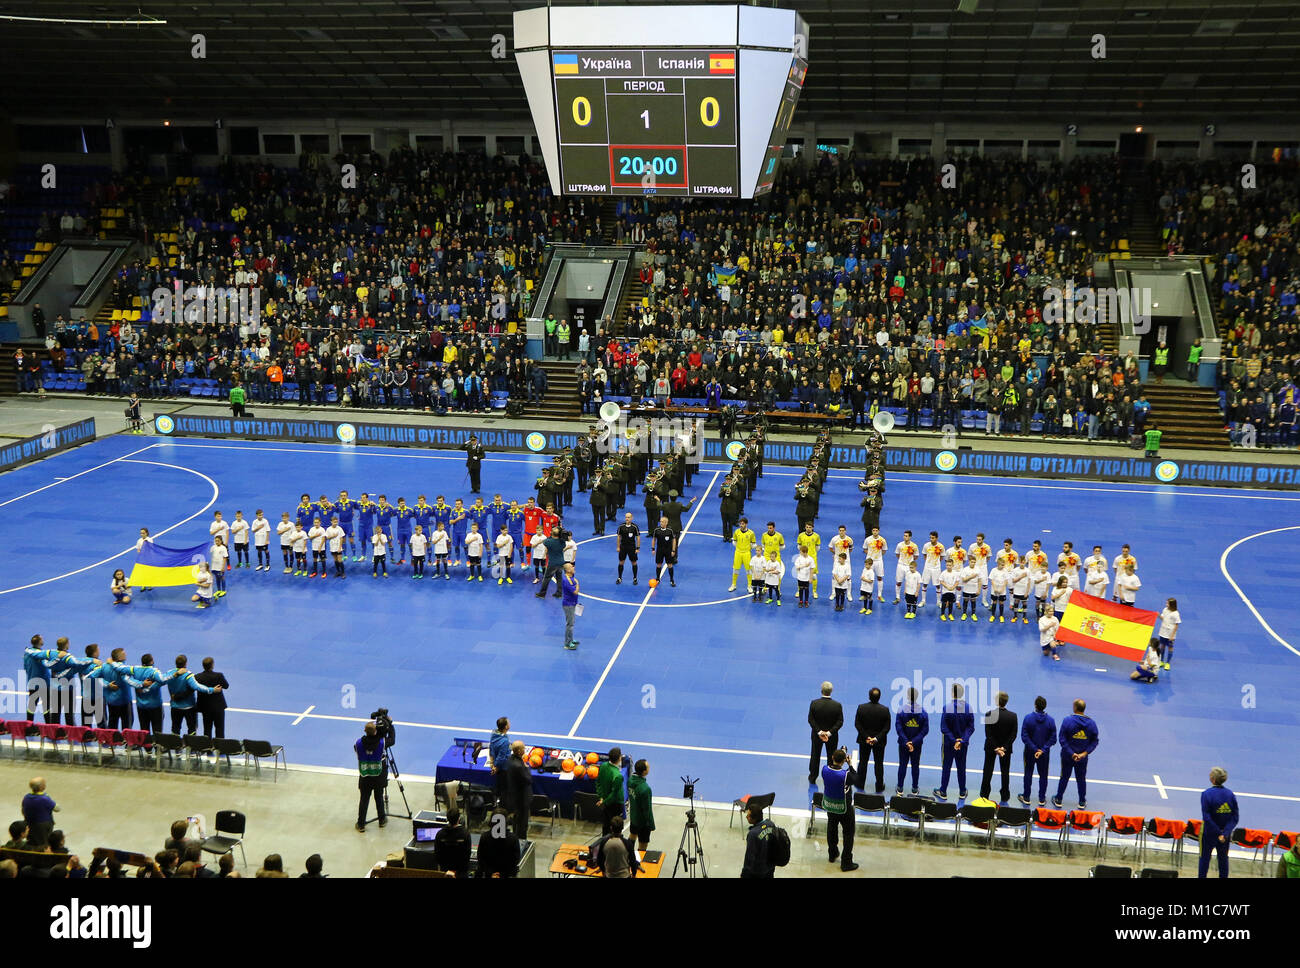 KYIV, UKRAINE - JANUARY 29, 2017: National Futsal Team of Ukraine (Left) and Spain listen to National anthems during their friendly Futsal match at Pa Stock Photo